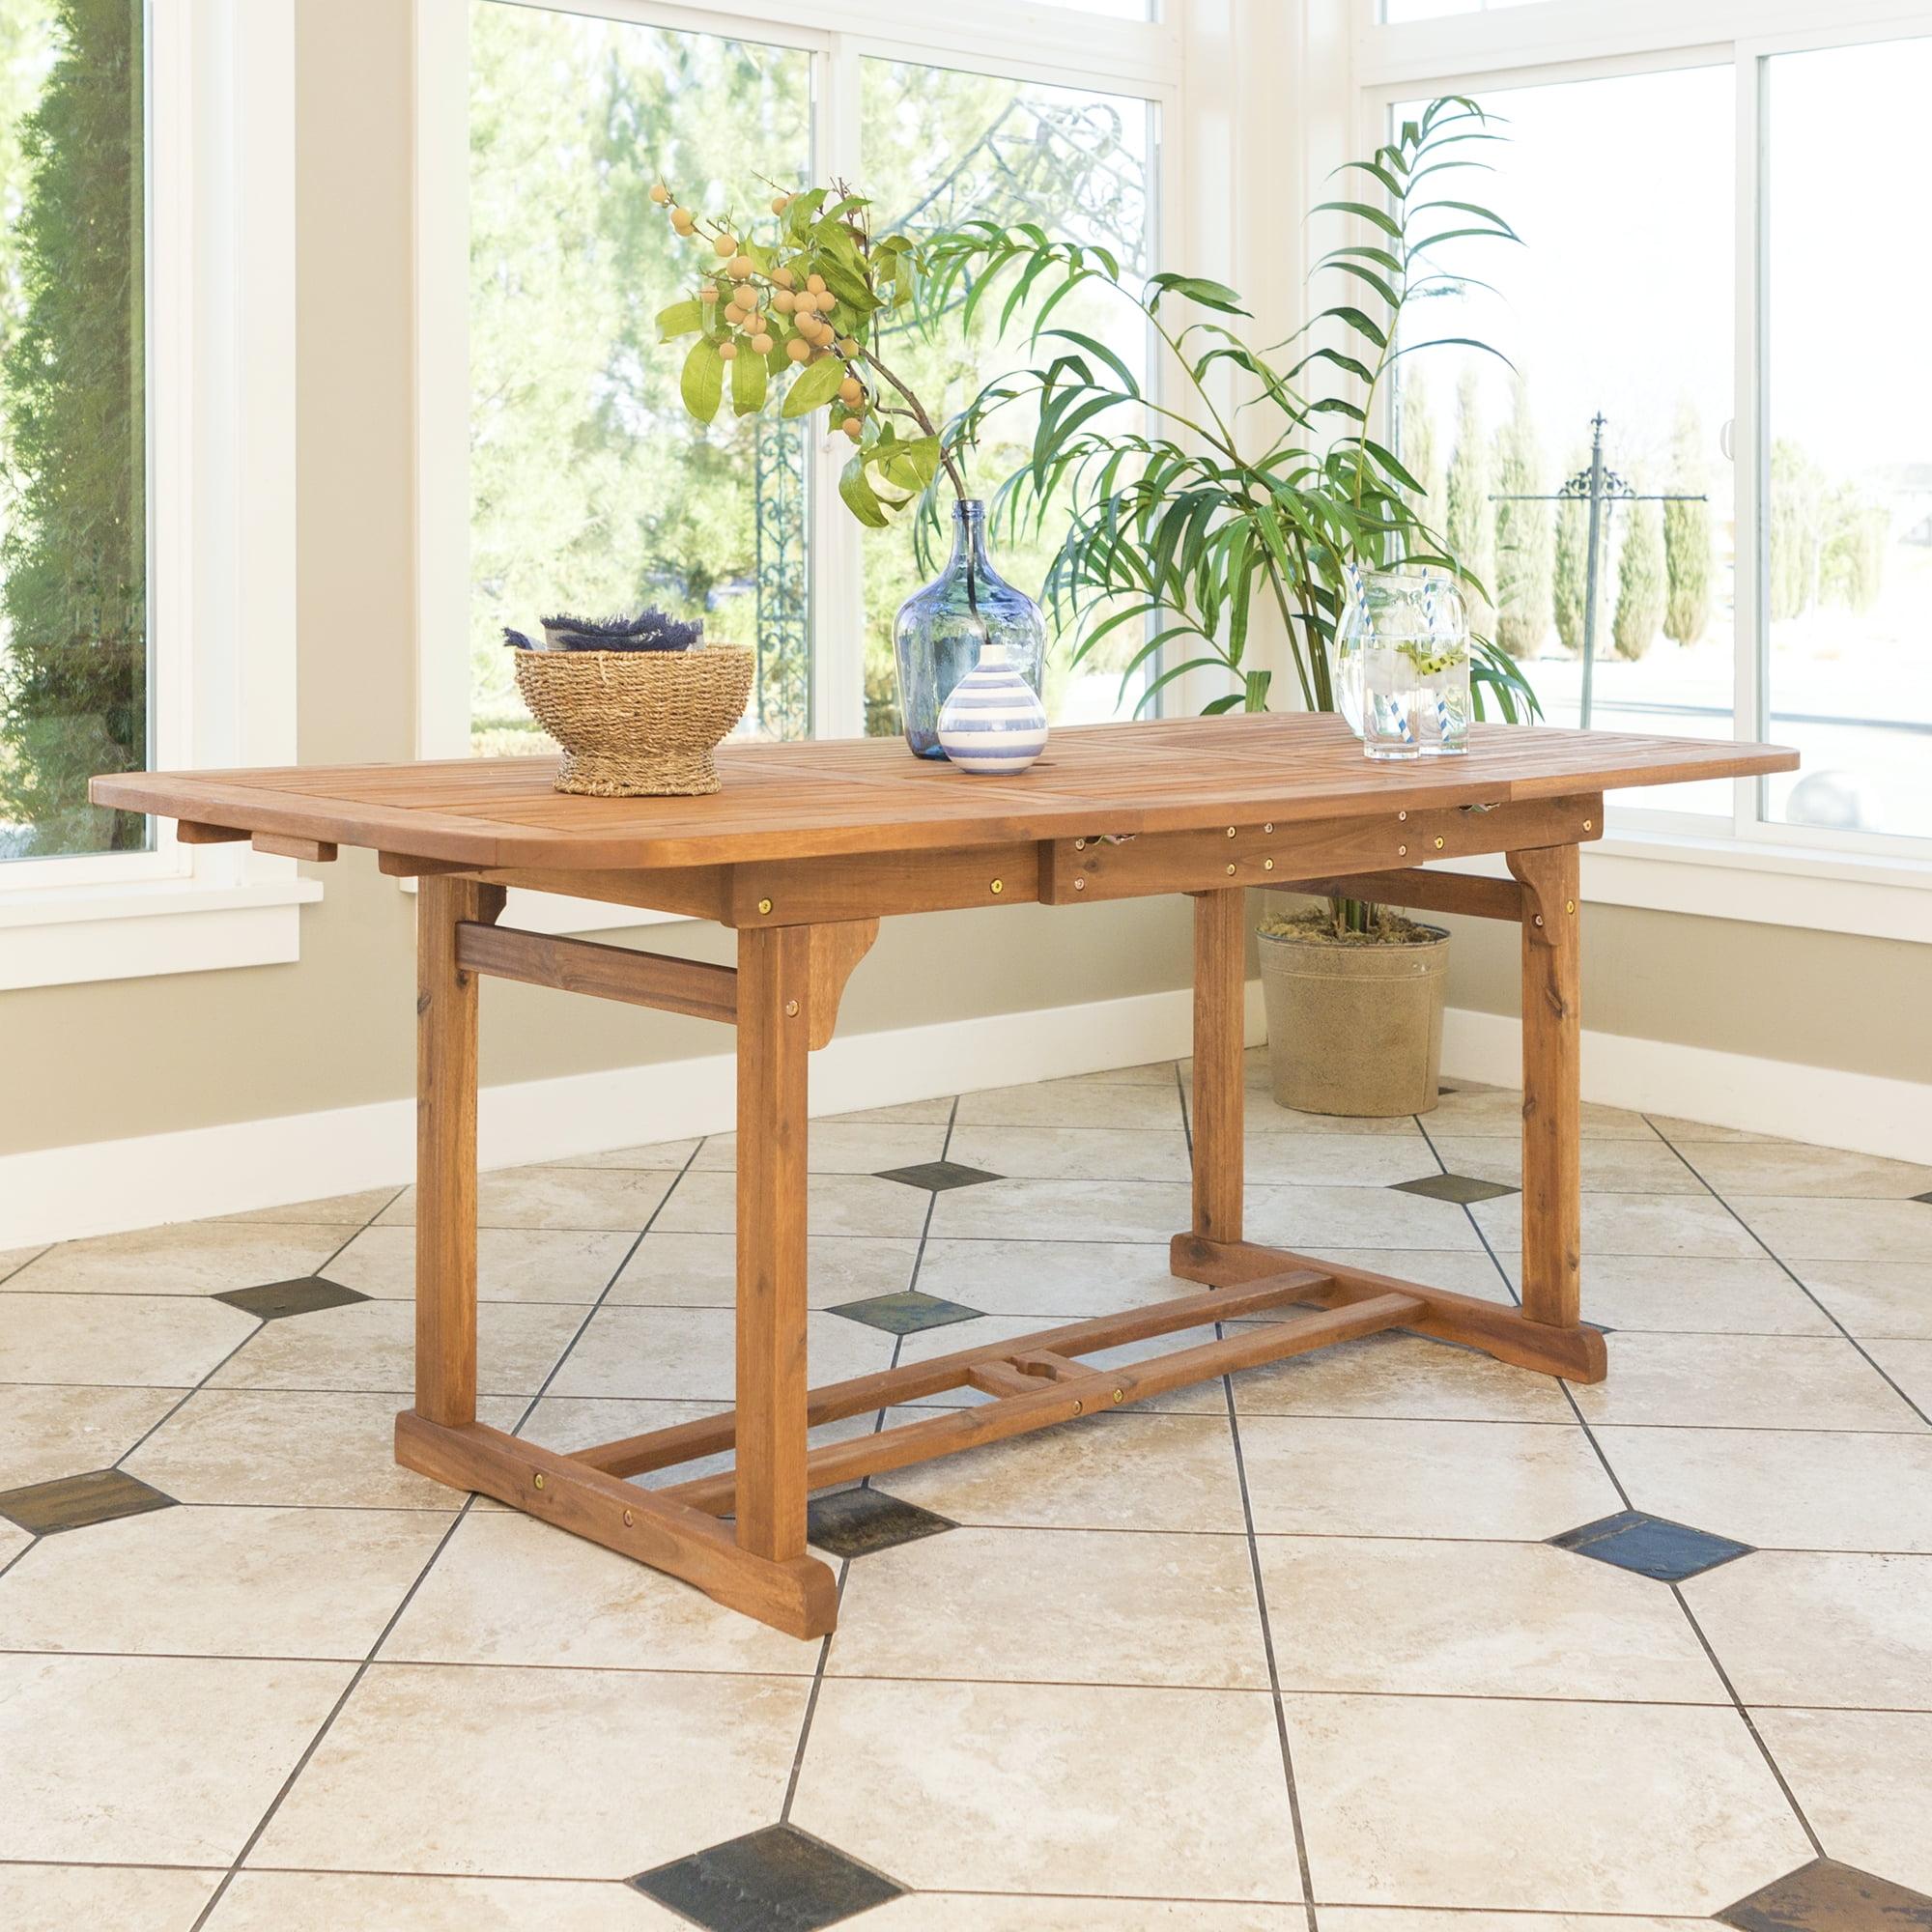 Extendable Acacia Wood Outdoor Dining Table in Natural Brown